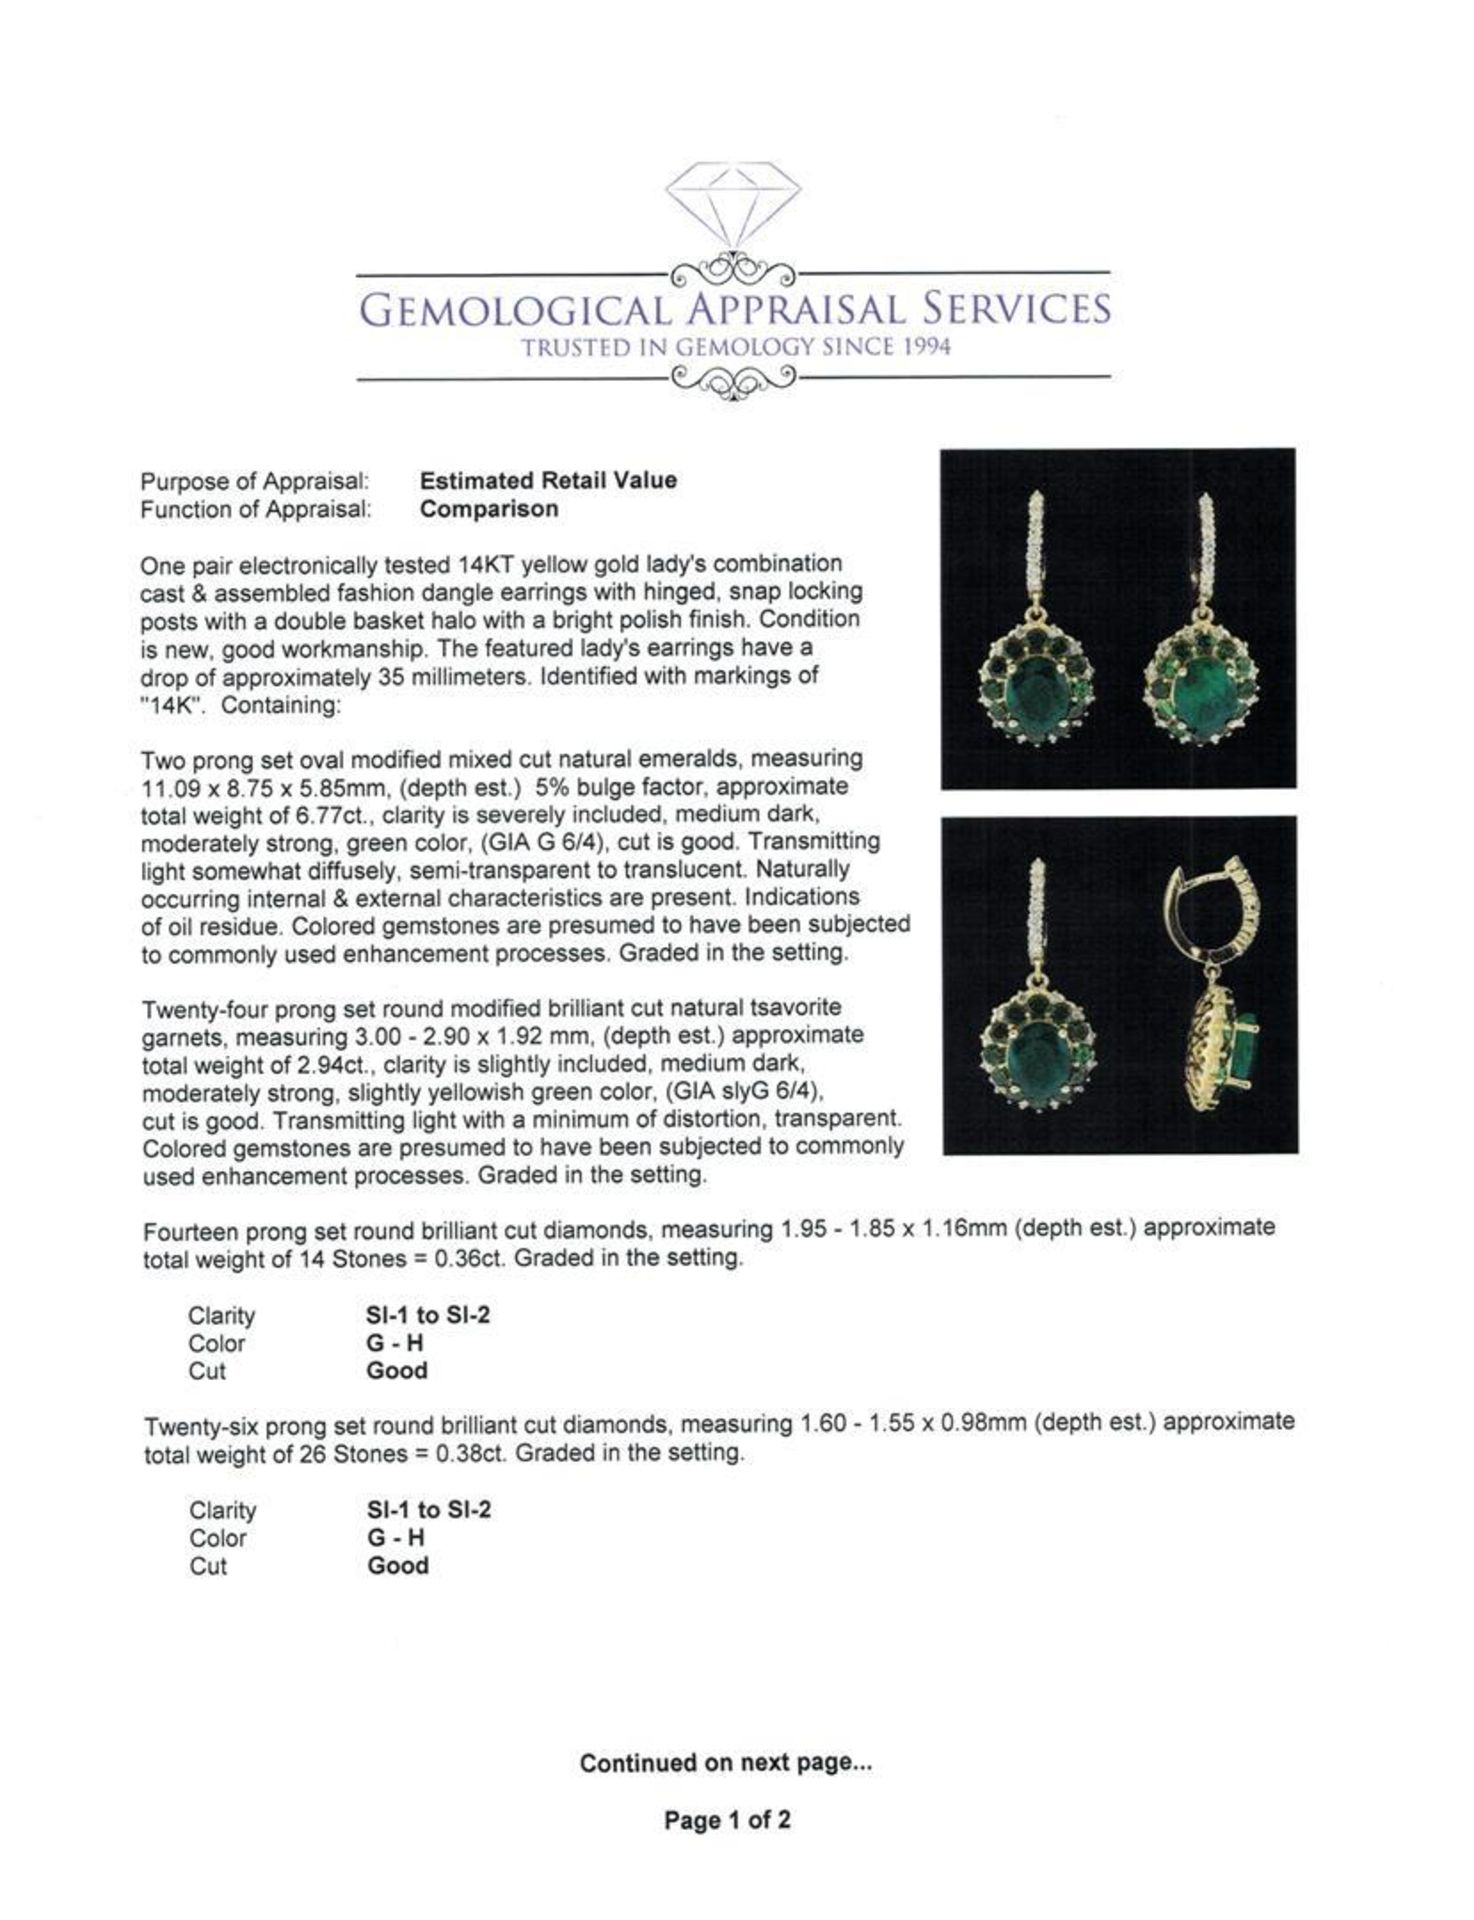 9.71 ctw Emerald and Diamond Earrings - 14KT Yellow Gold - Image 3 of 4